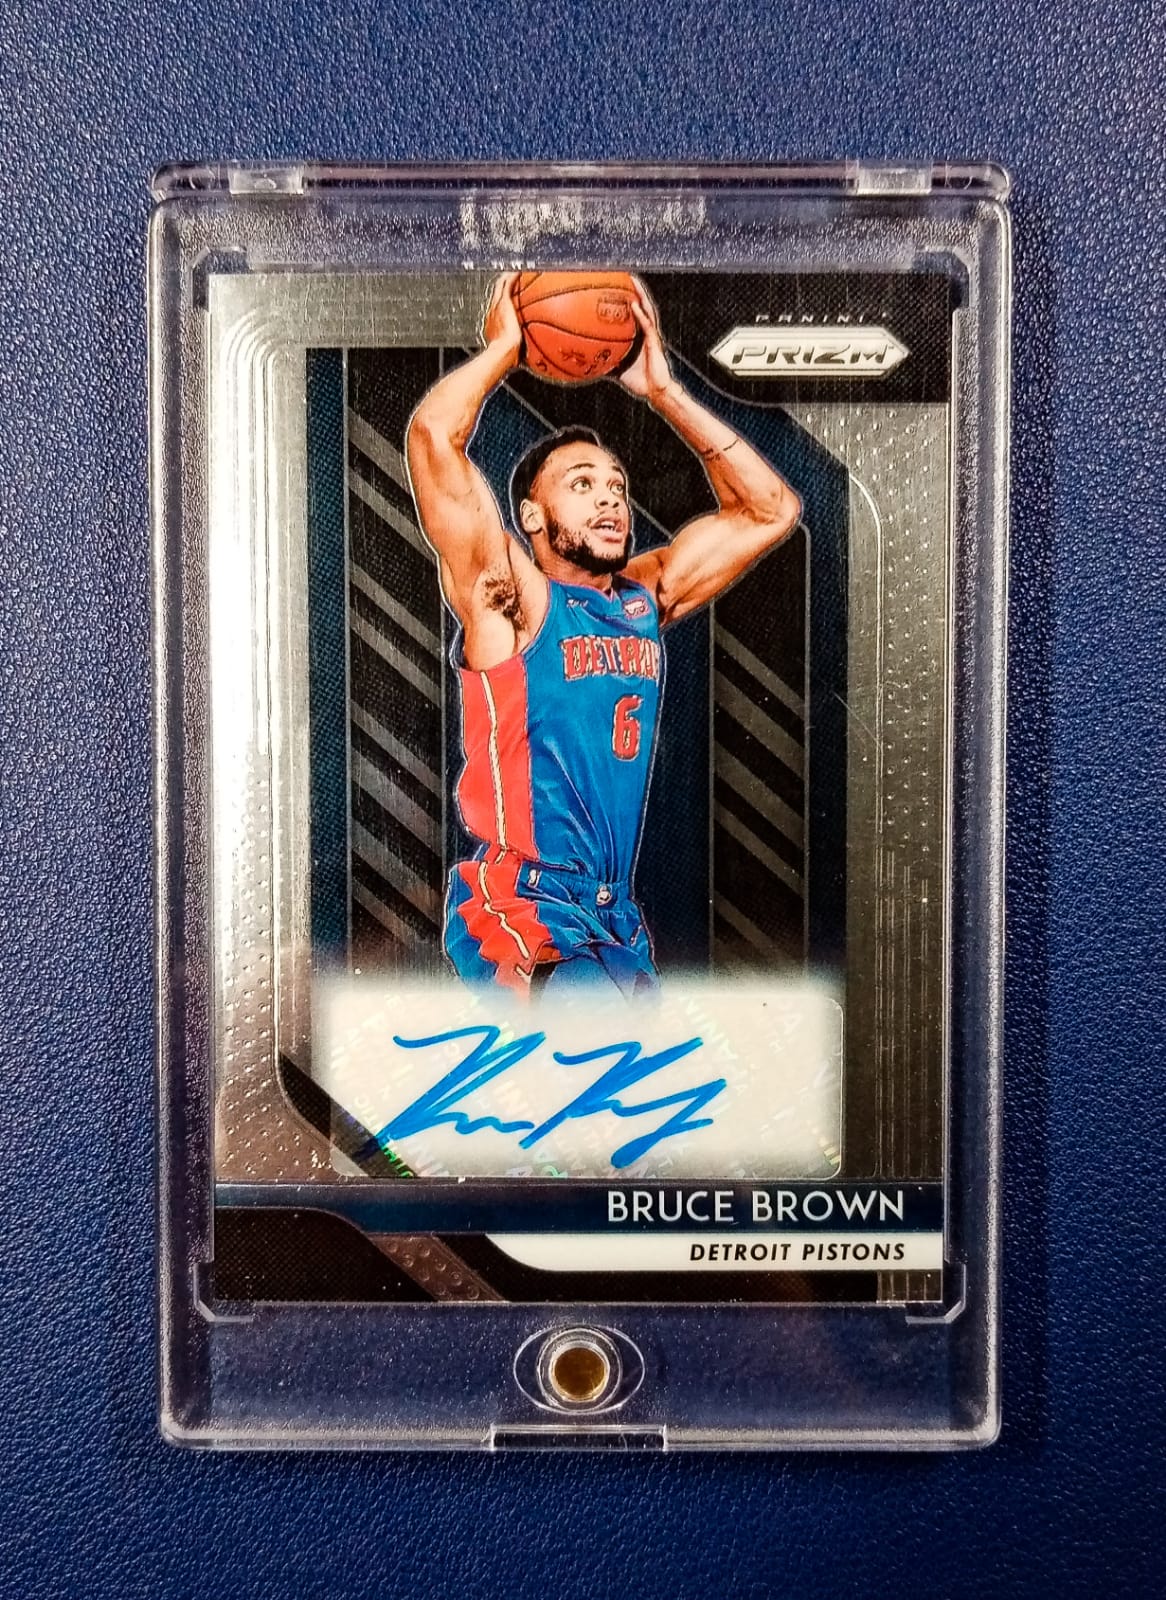 Bruce Brown 2018 Autograph Prizm NBA Card w/ Free Mags